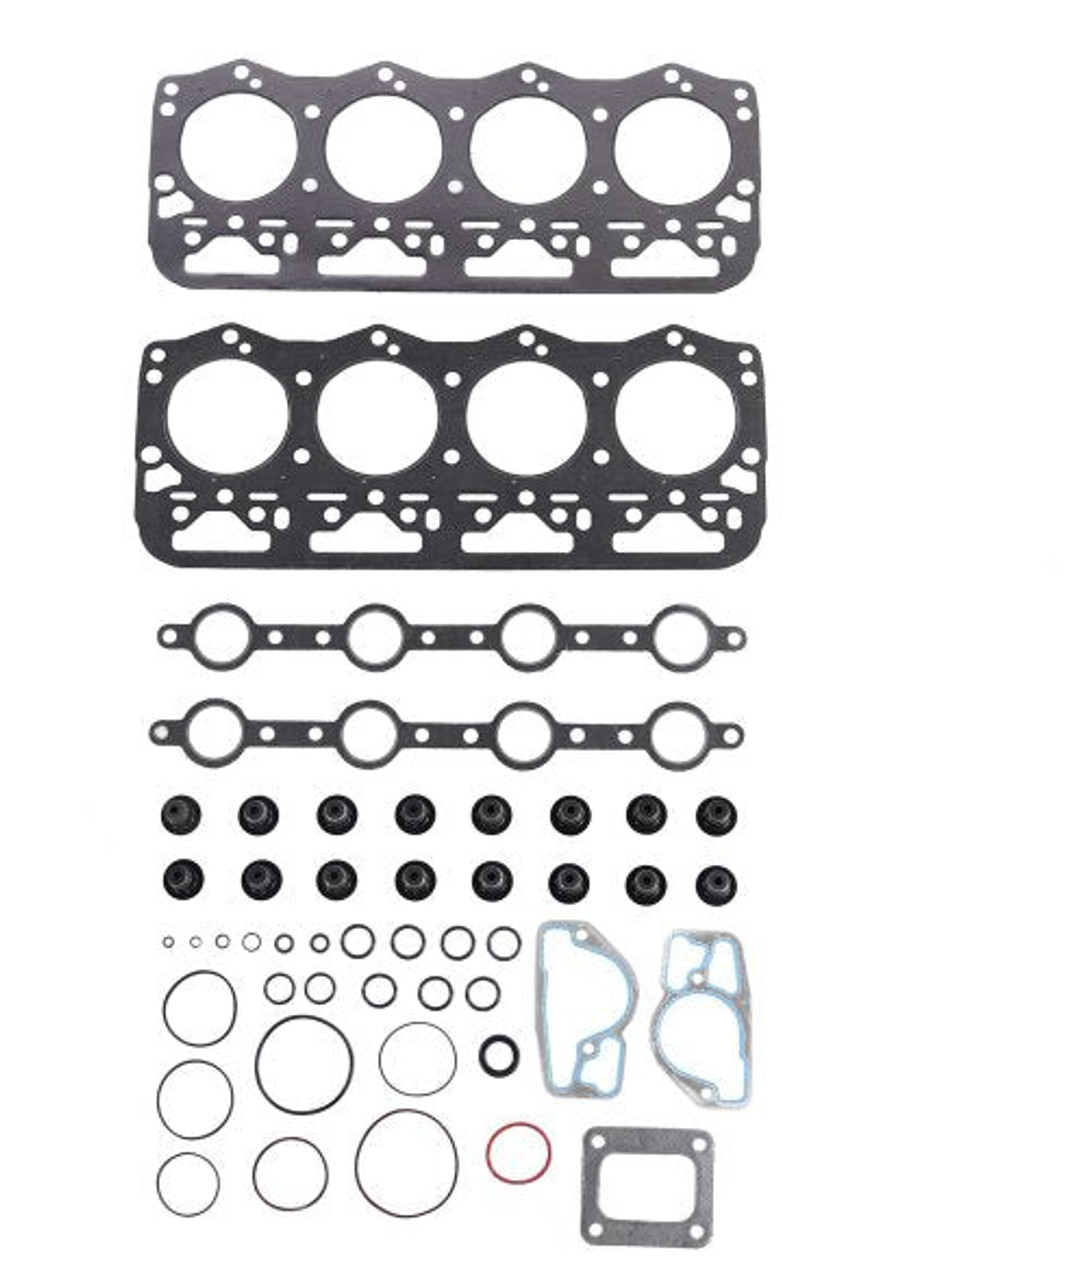 Head Gasket Set with Head Bolt Kit - 1997 Ford F59 7.3L Engine Parts # HGB4200ZE68